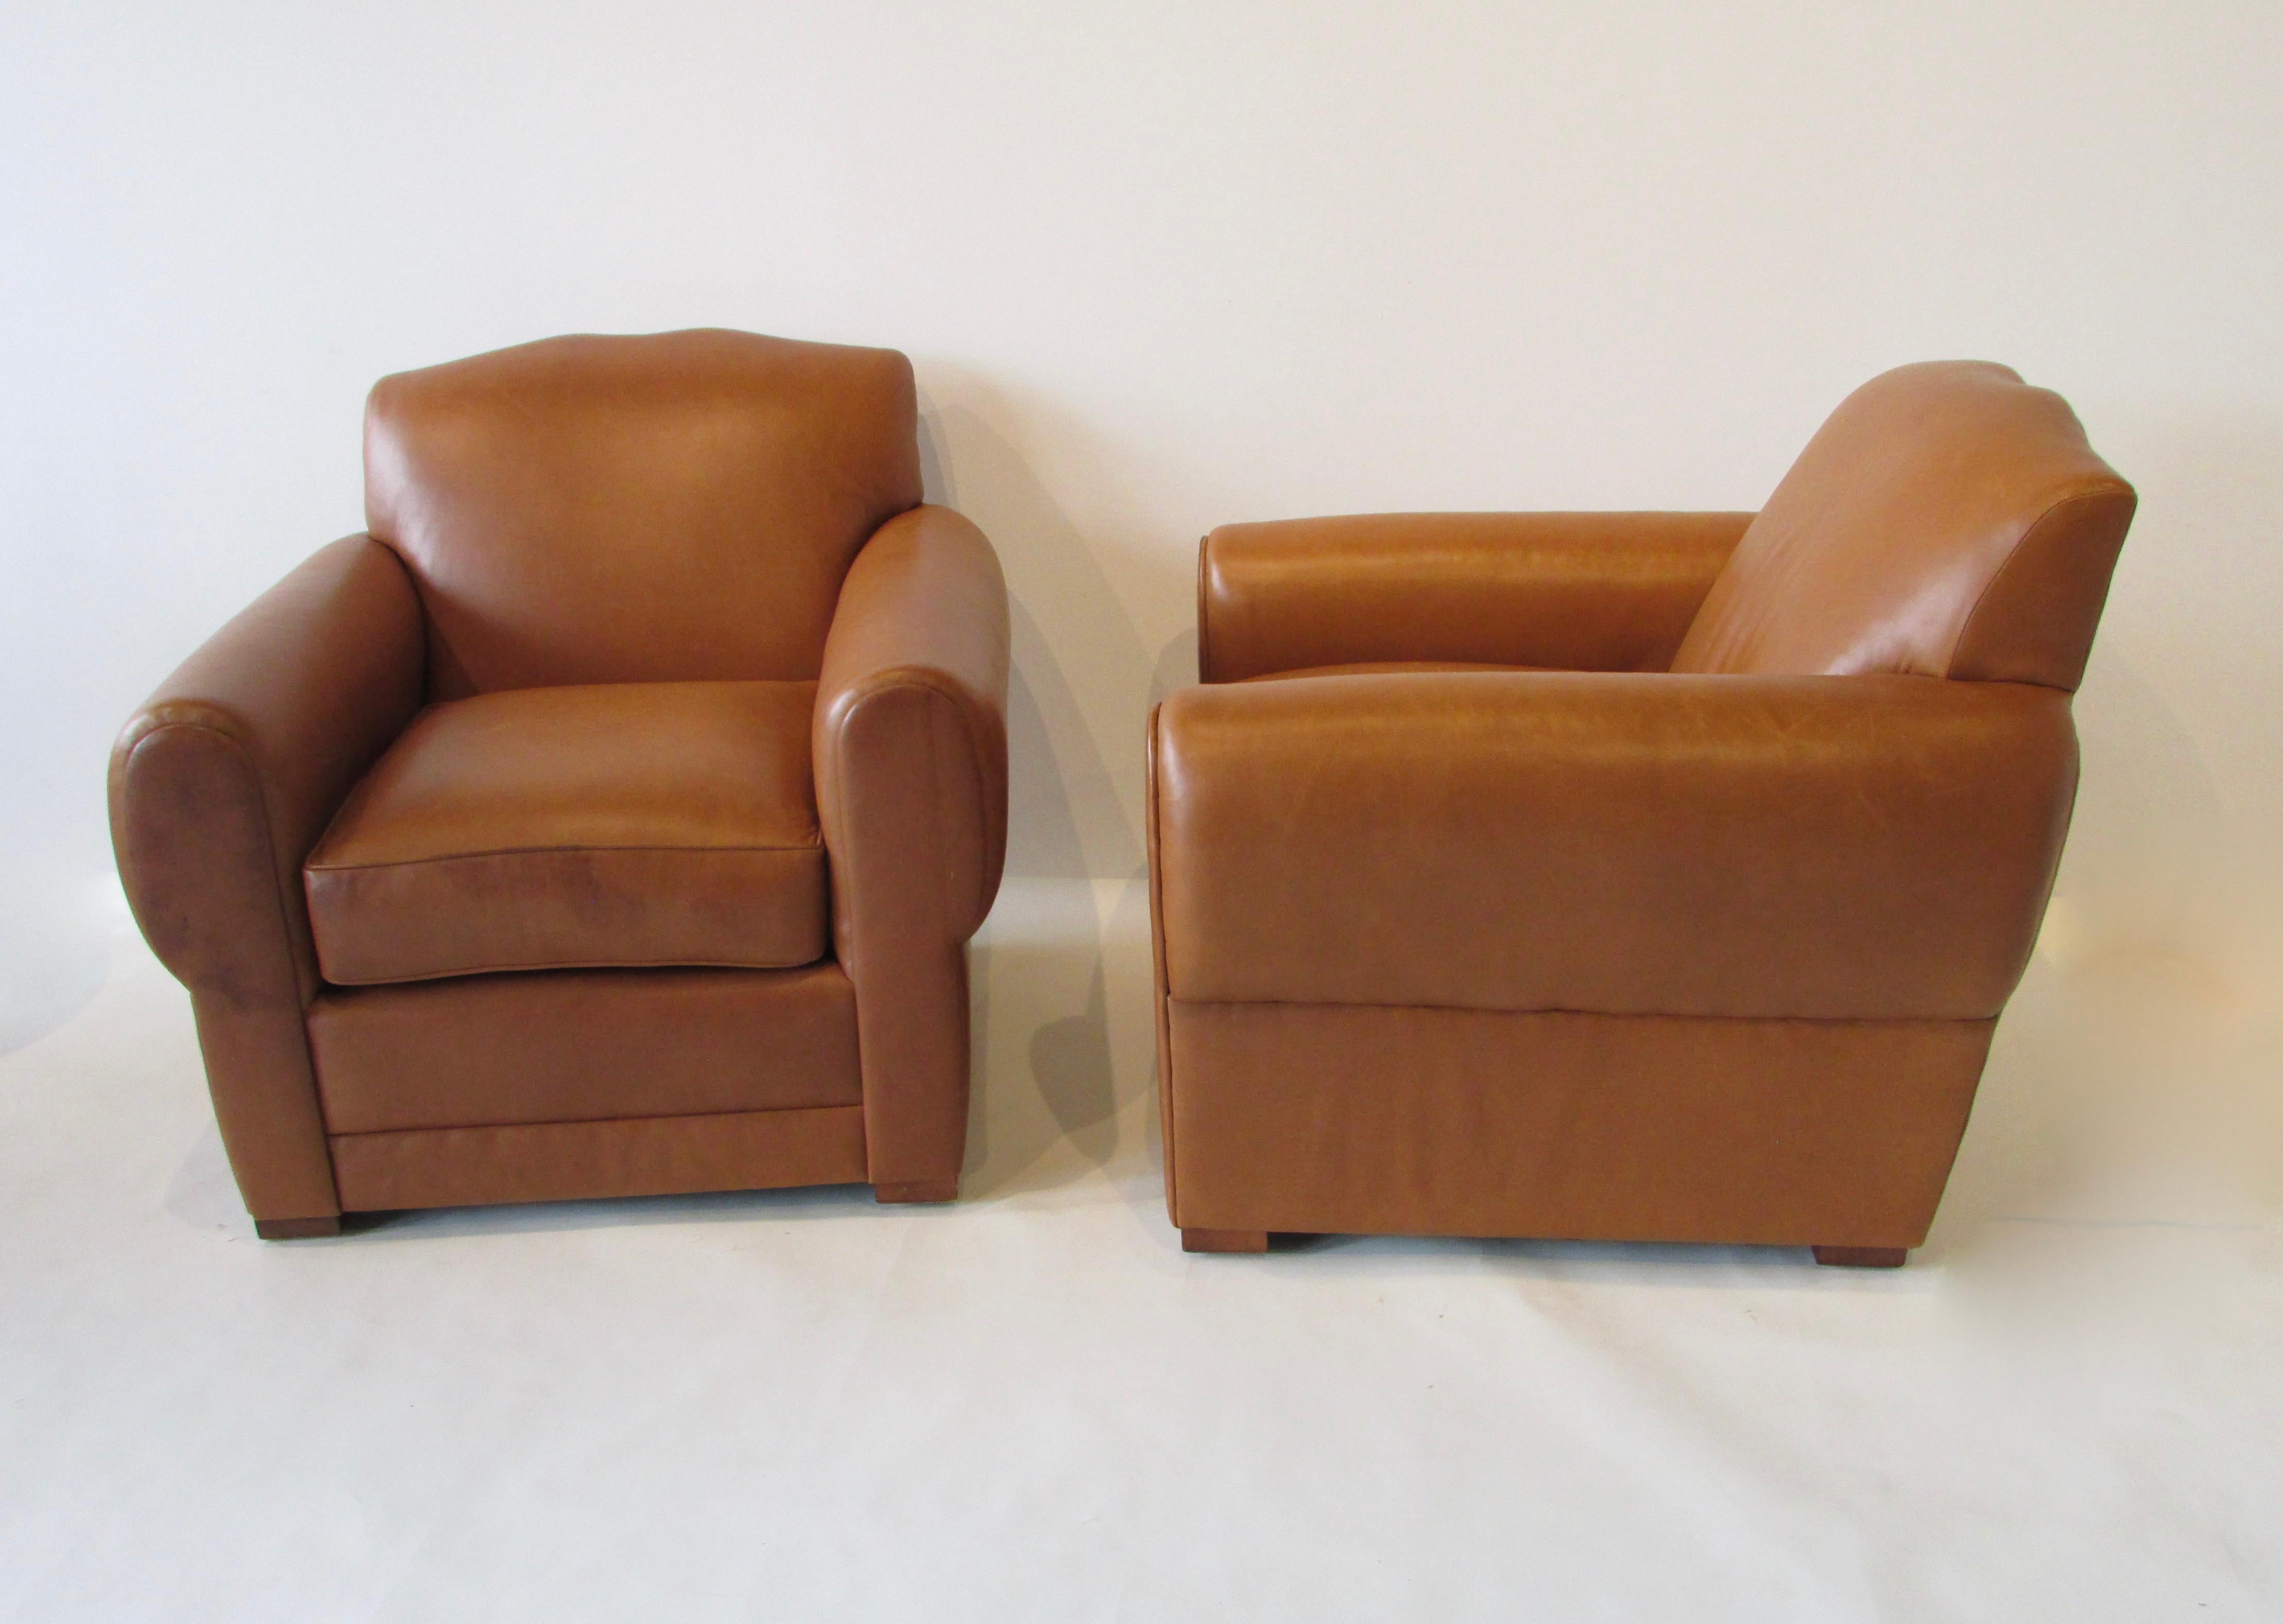 Ralph Laurens french Art Deco styled chairs. Produced by Henredon. Covered in soft supple leather. Big and comfortable. Light wear shows more as patina than wear or age. Chairs are 36